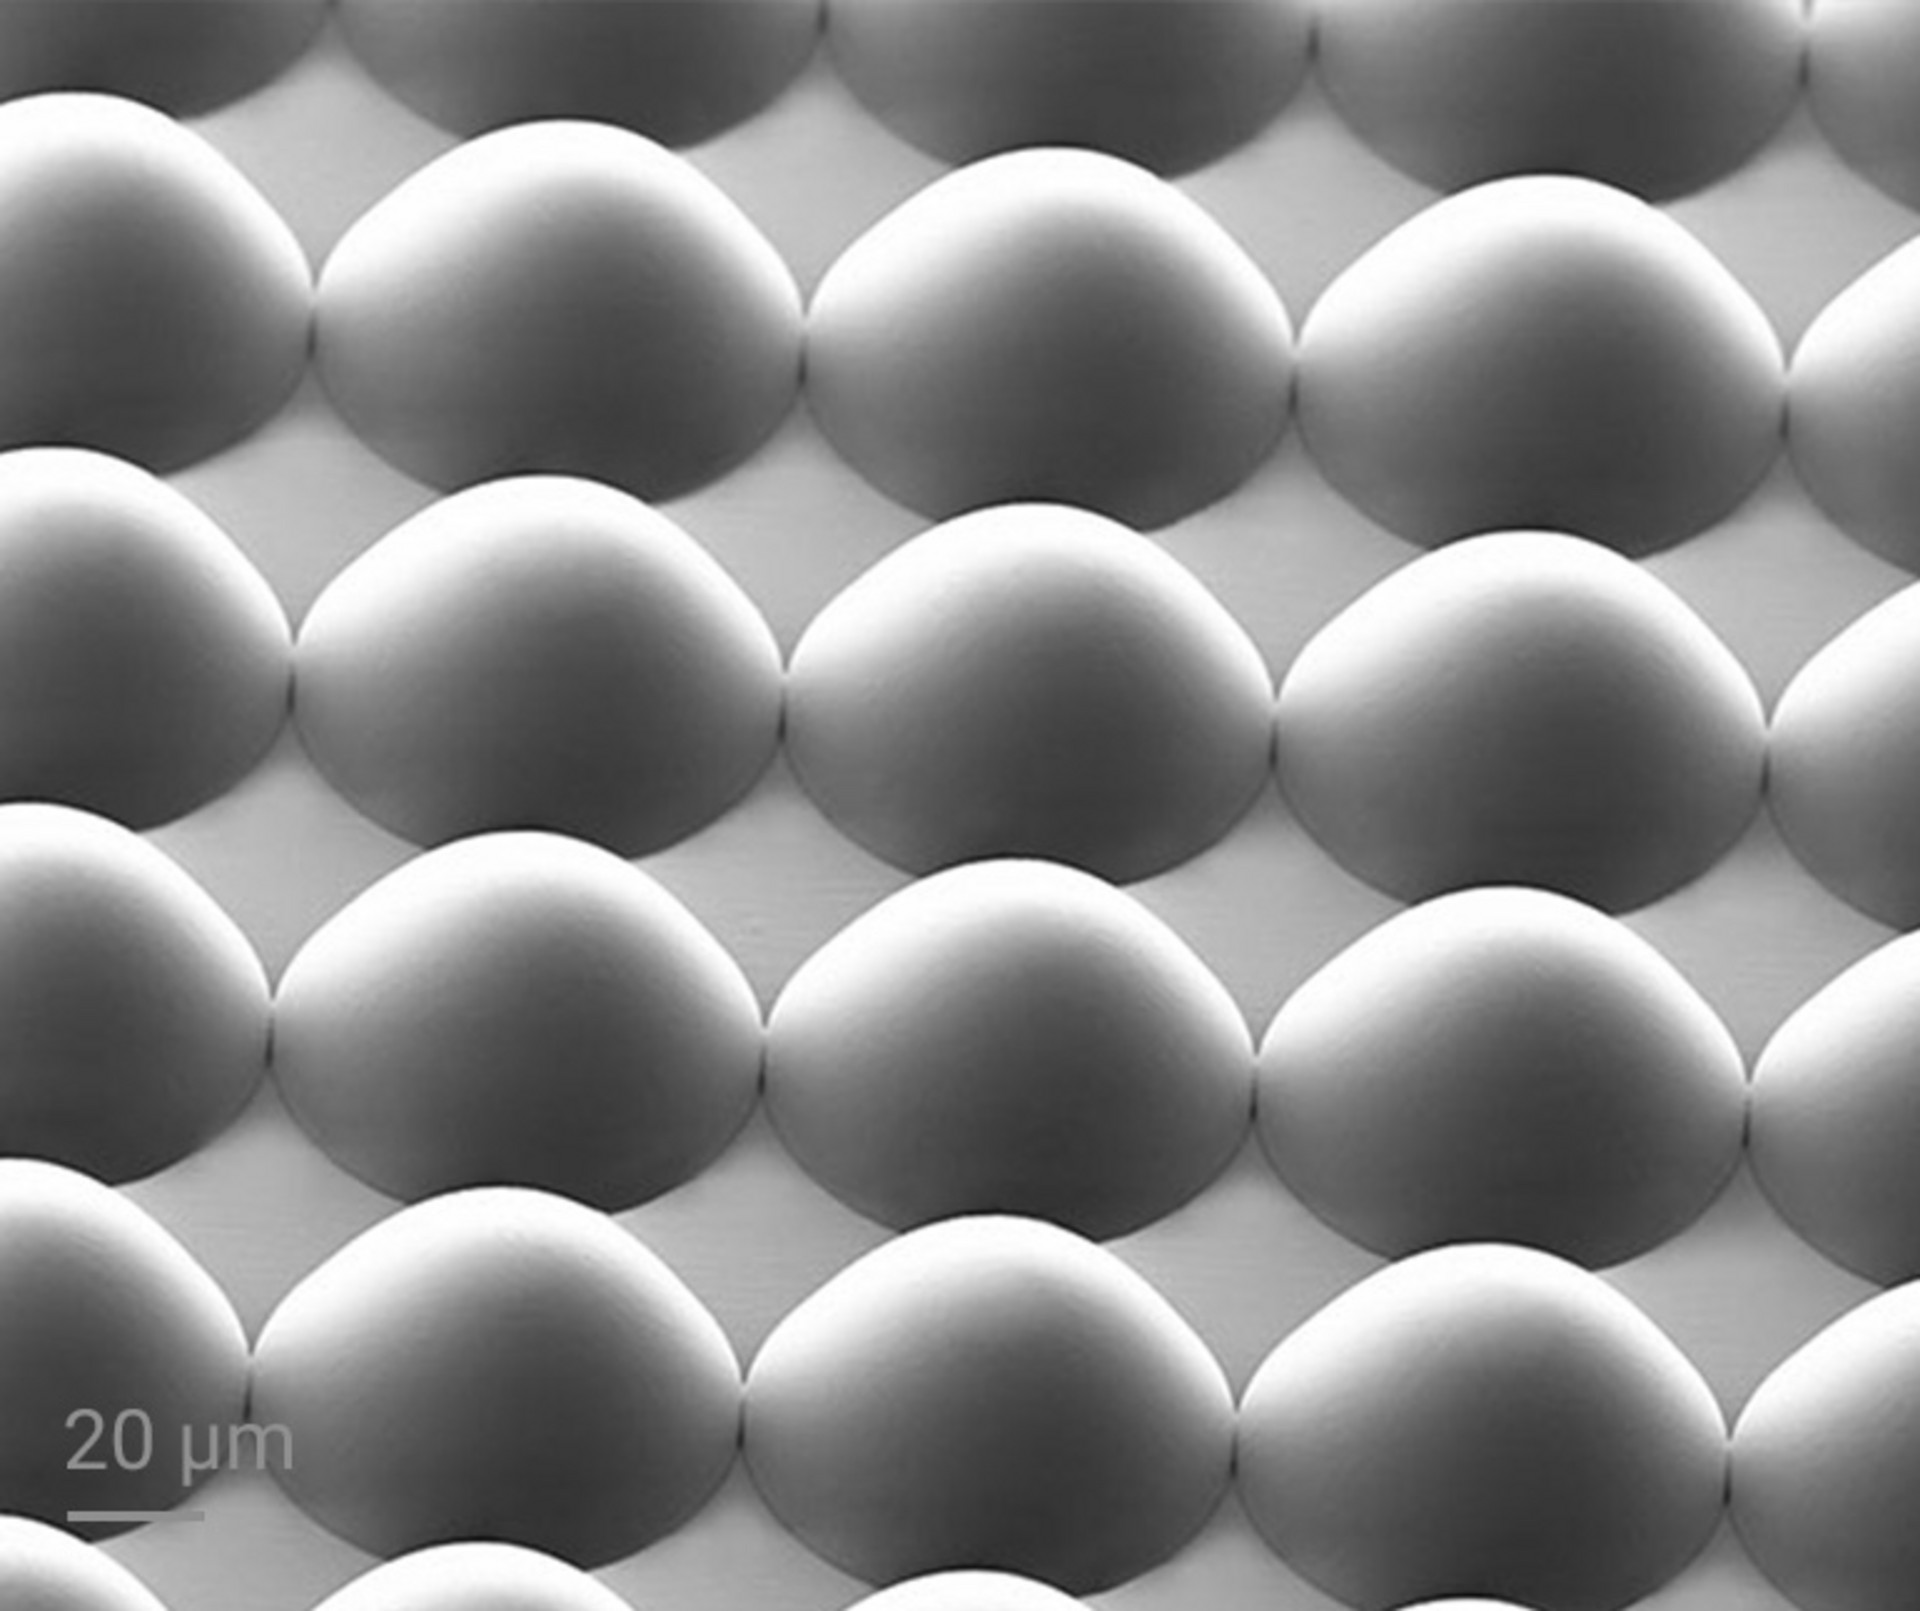 Microlens array fabricated by means of 2GL.